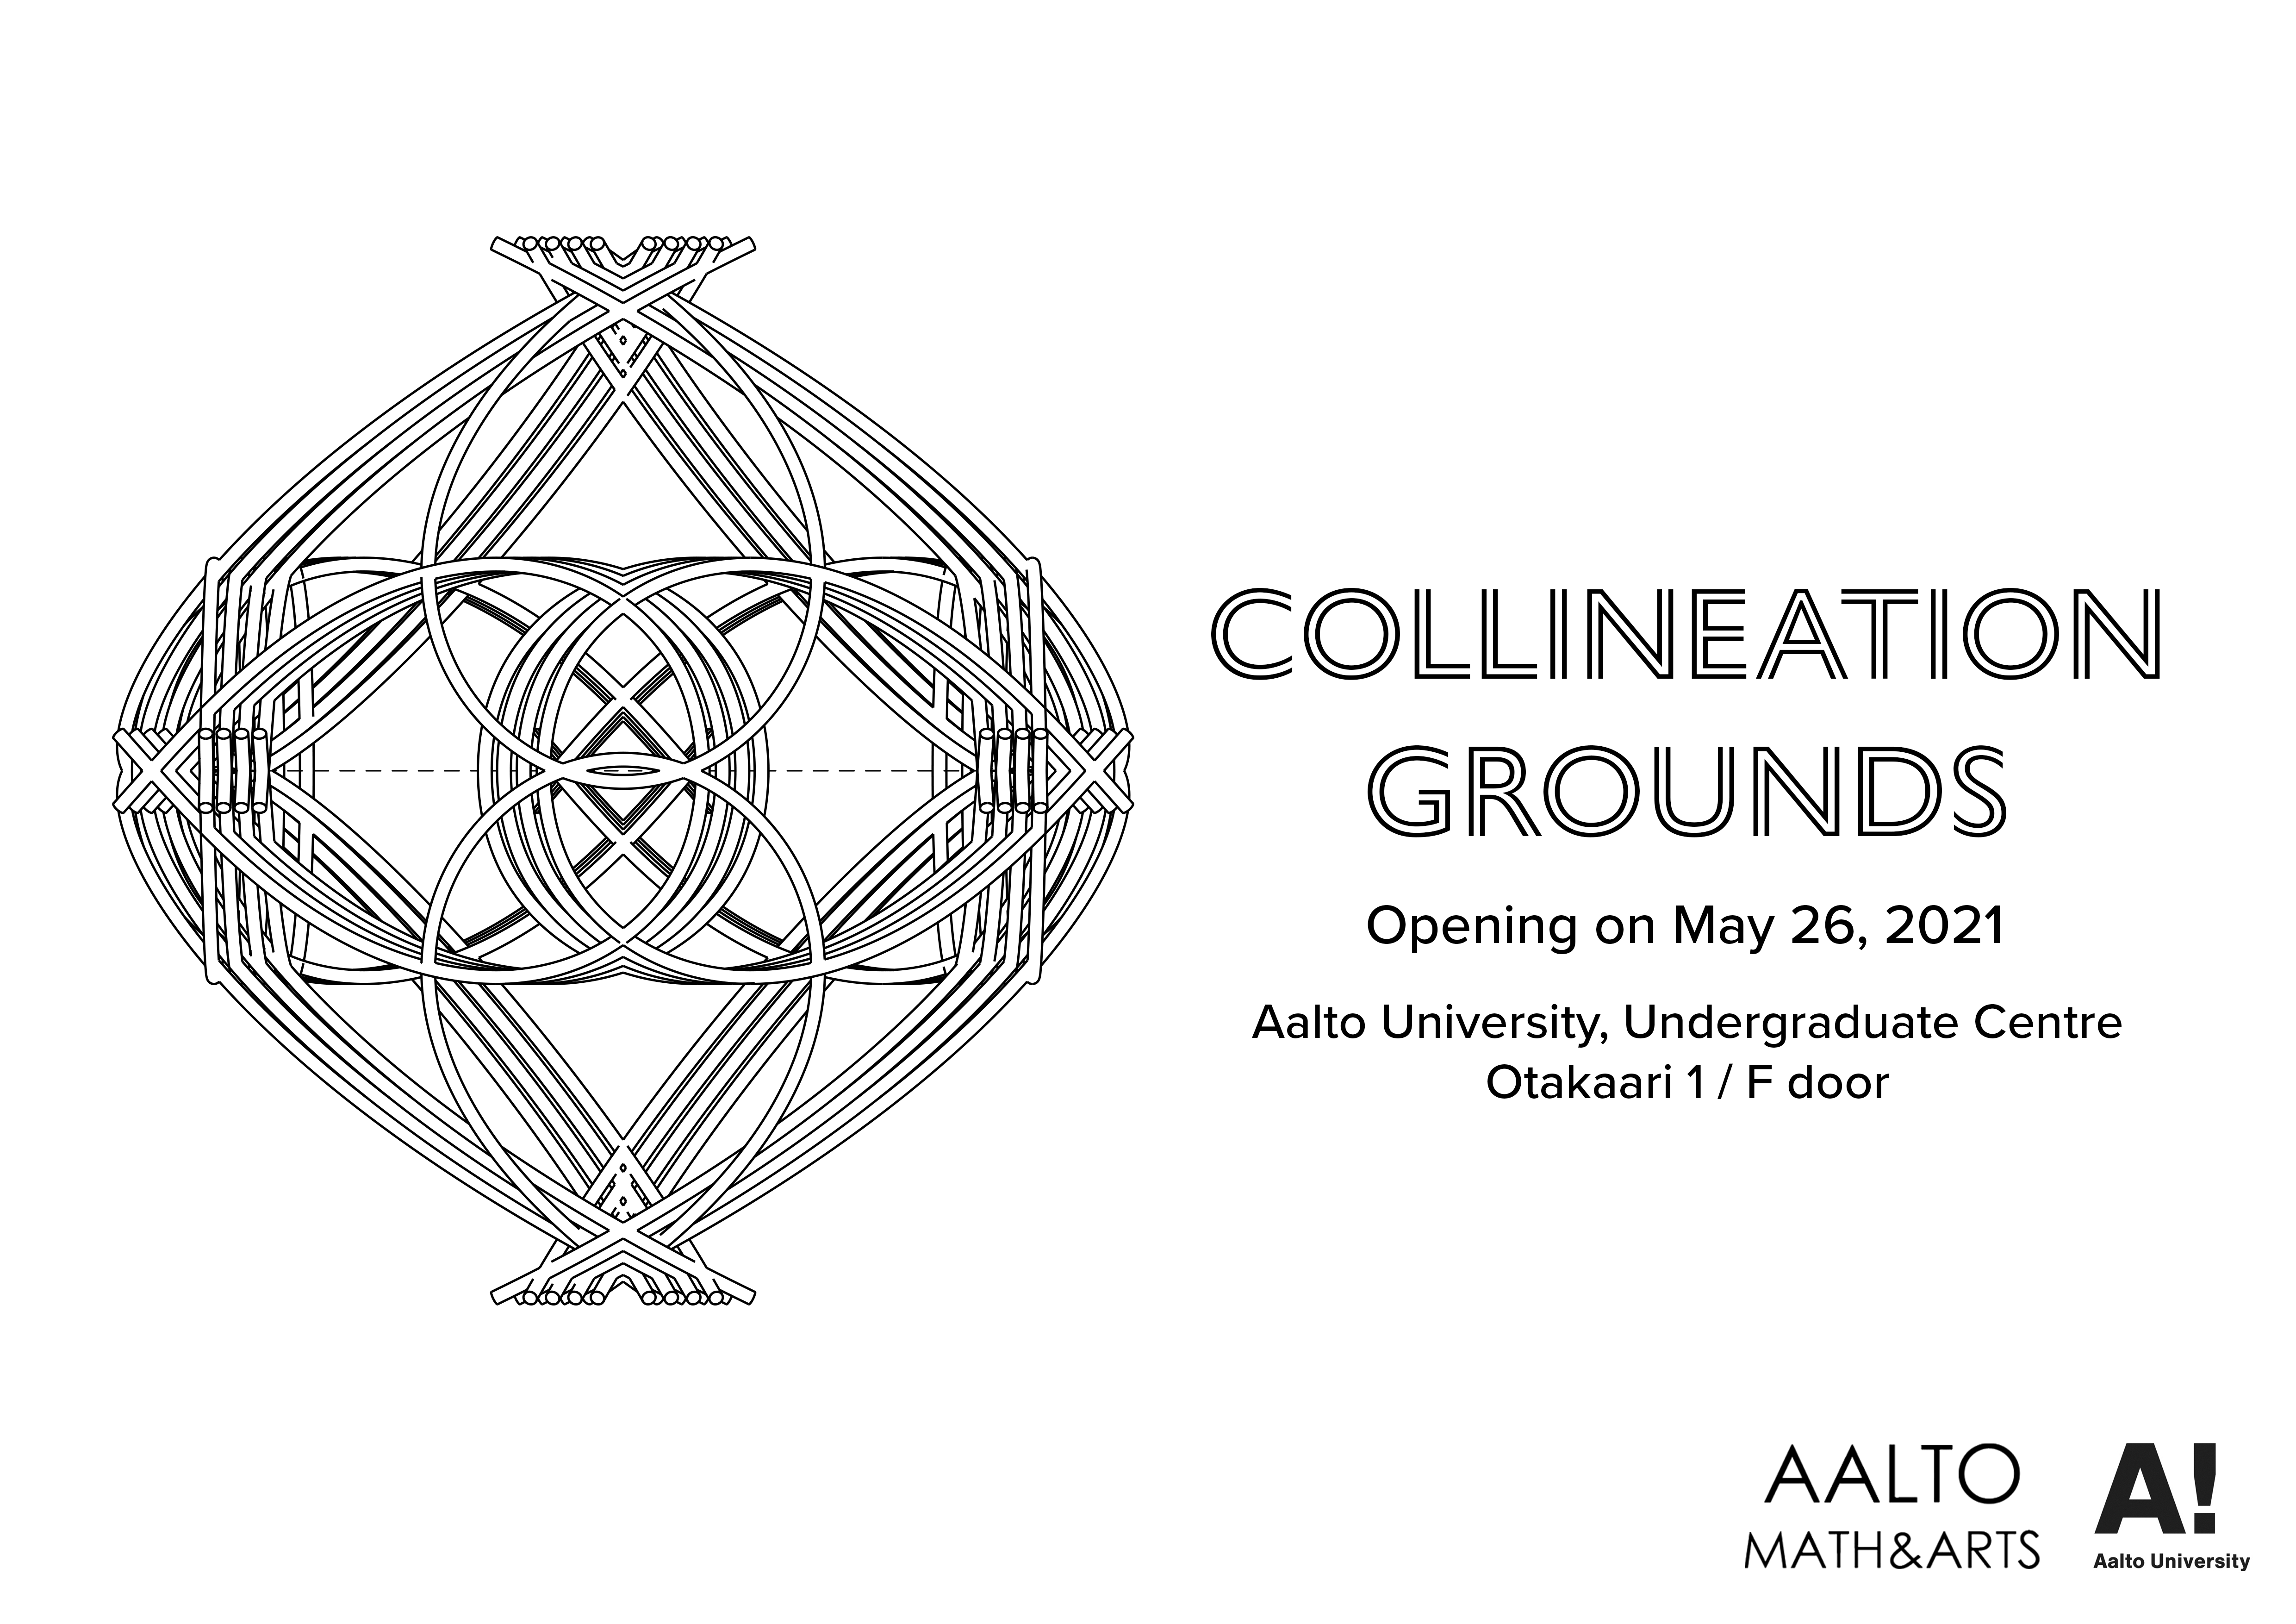 Collineation Grounds